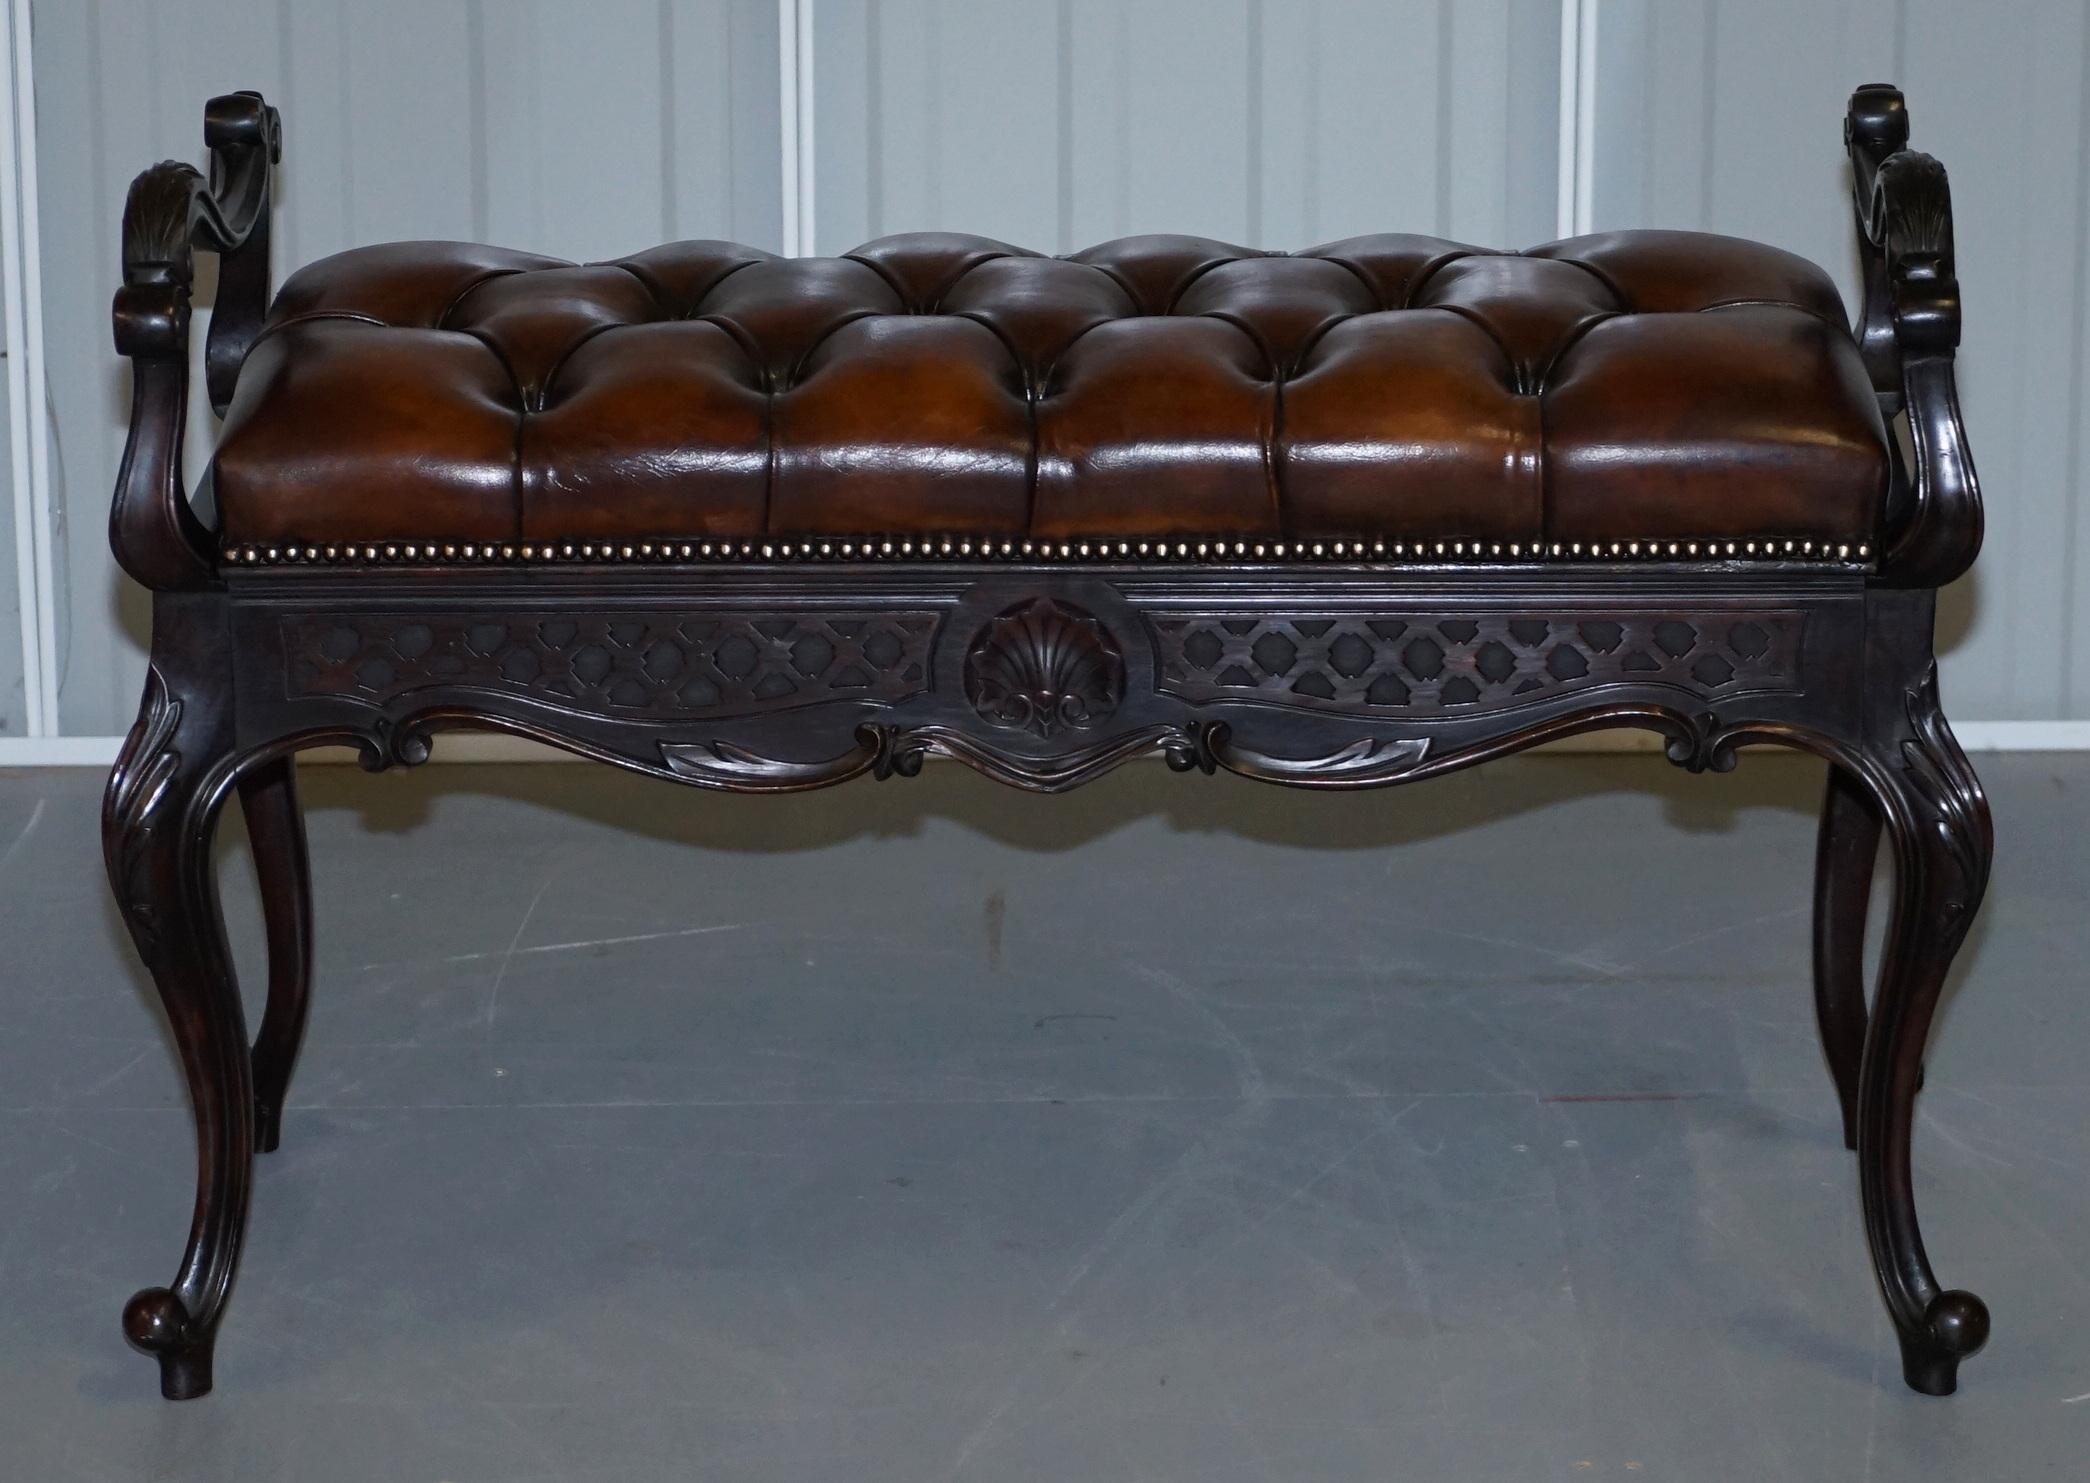 We are delighted to offer for sale this very rare original Victorian hand-sawn, two person Piano stool bench, fully restored with Chesterfield cigar brown leather 

A very good looking collectable and rare bench. As you can see by the pictures of